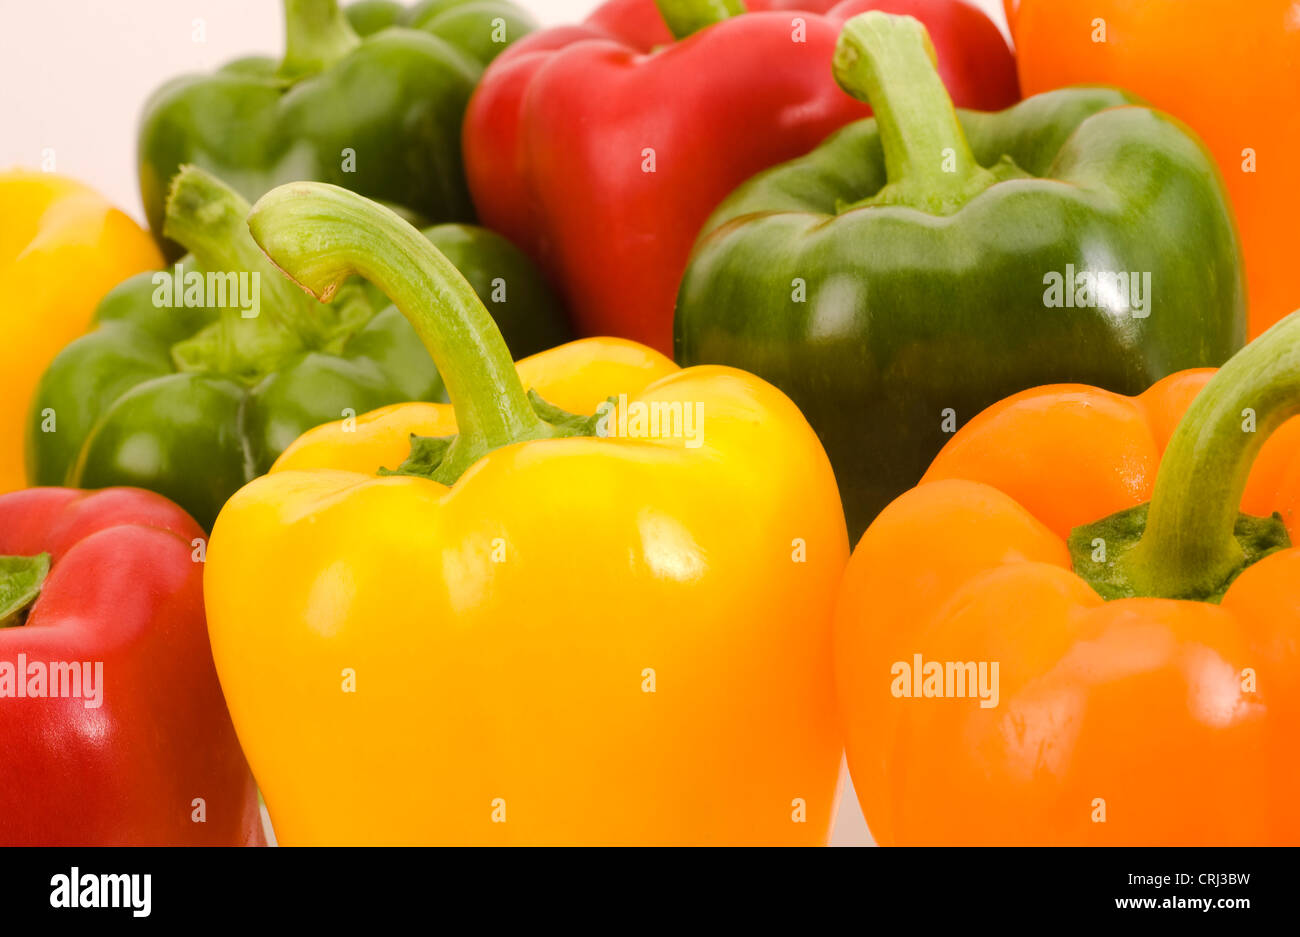 Peppers. Peppers contain vitamin C and vary in colour, due to their maturity. This colour varies through green to yellow to red. Stock Photo